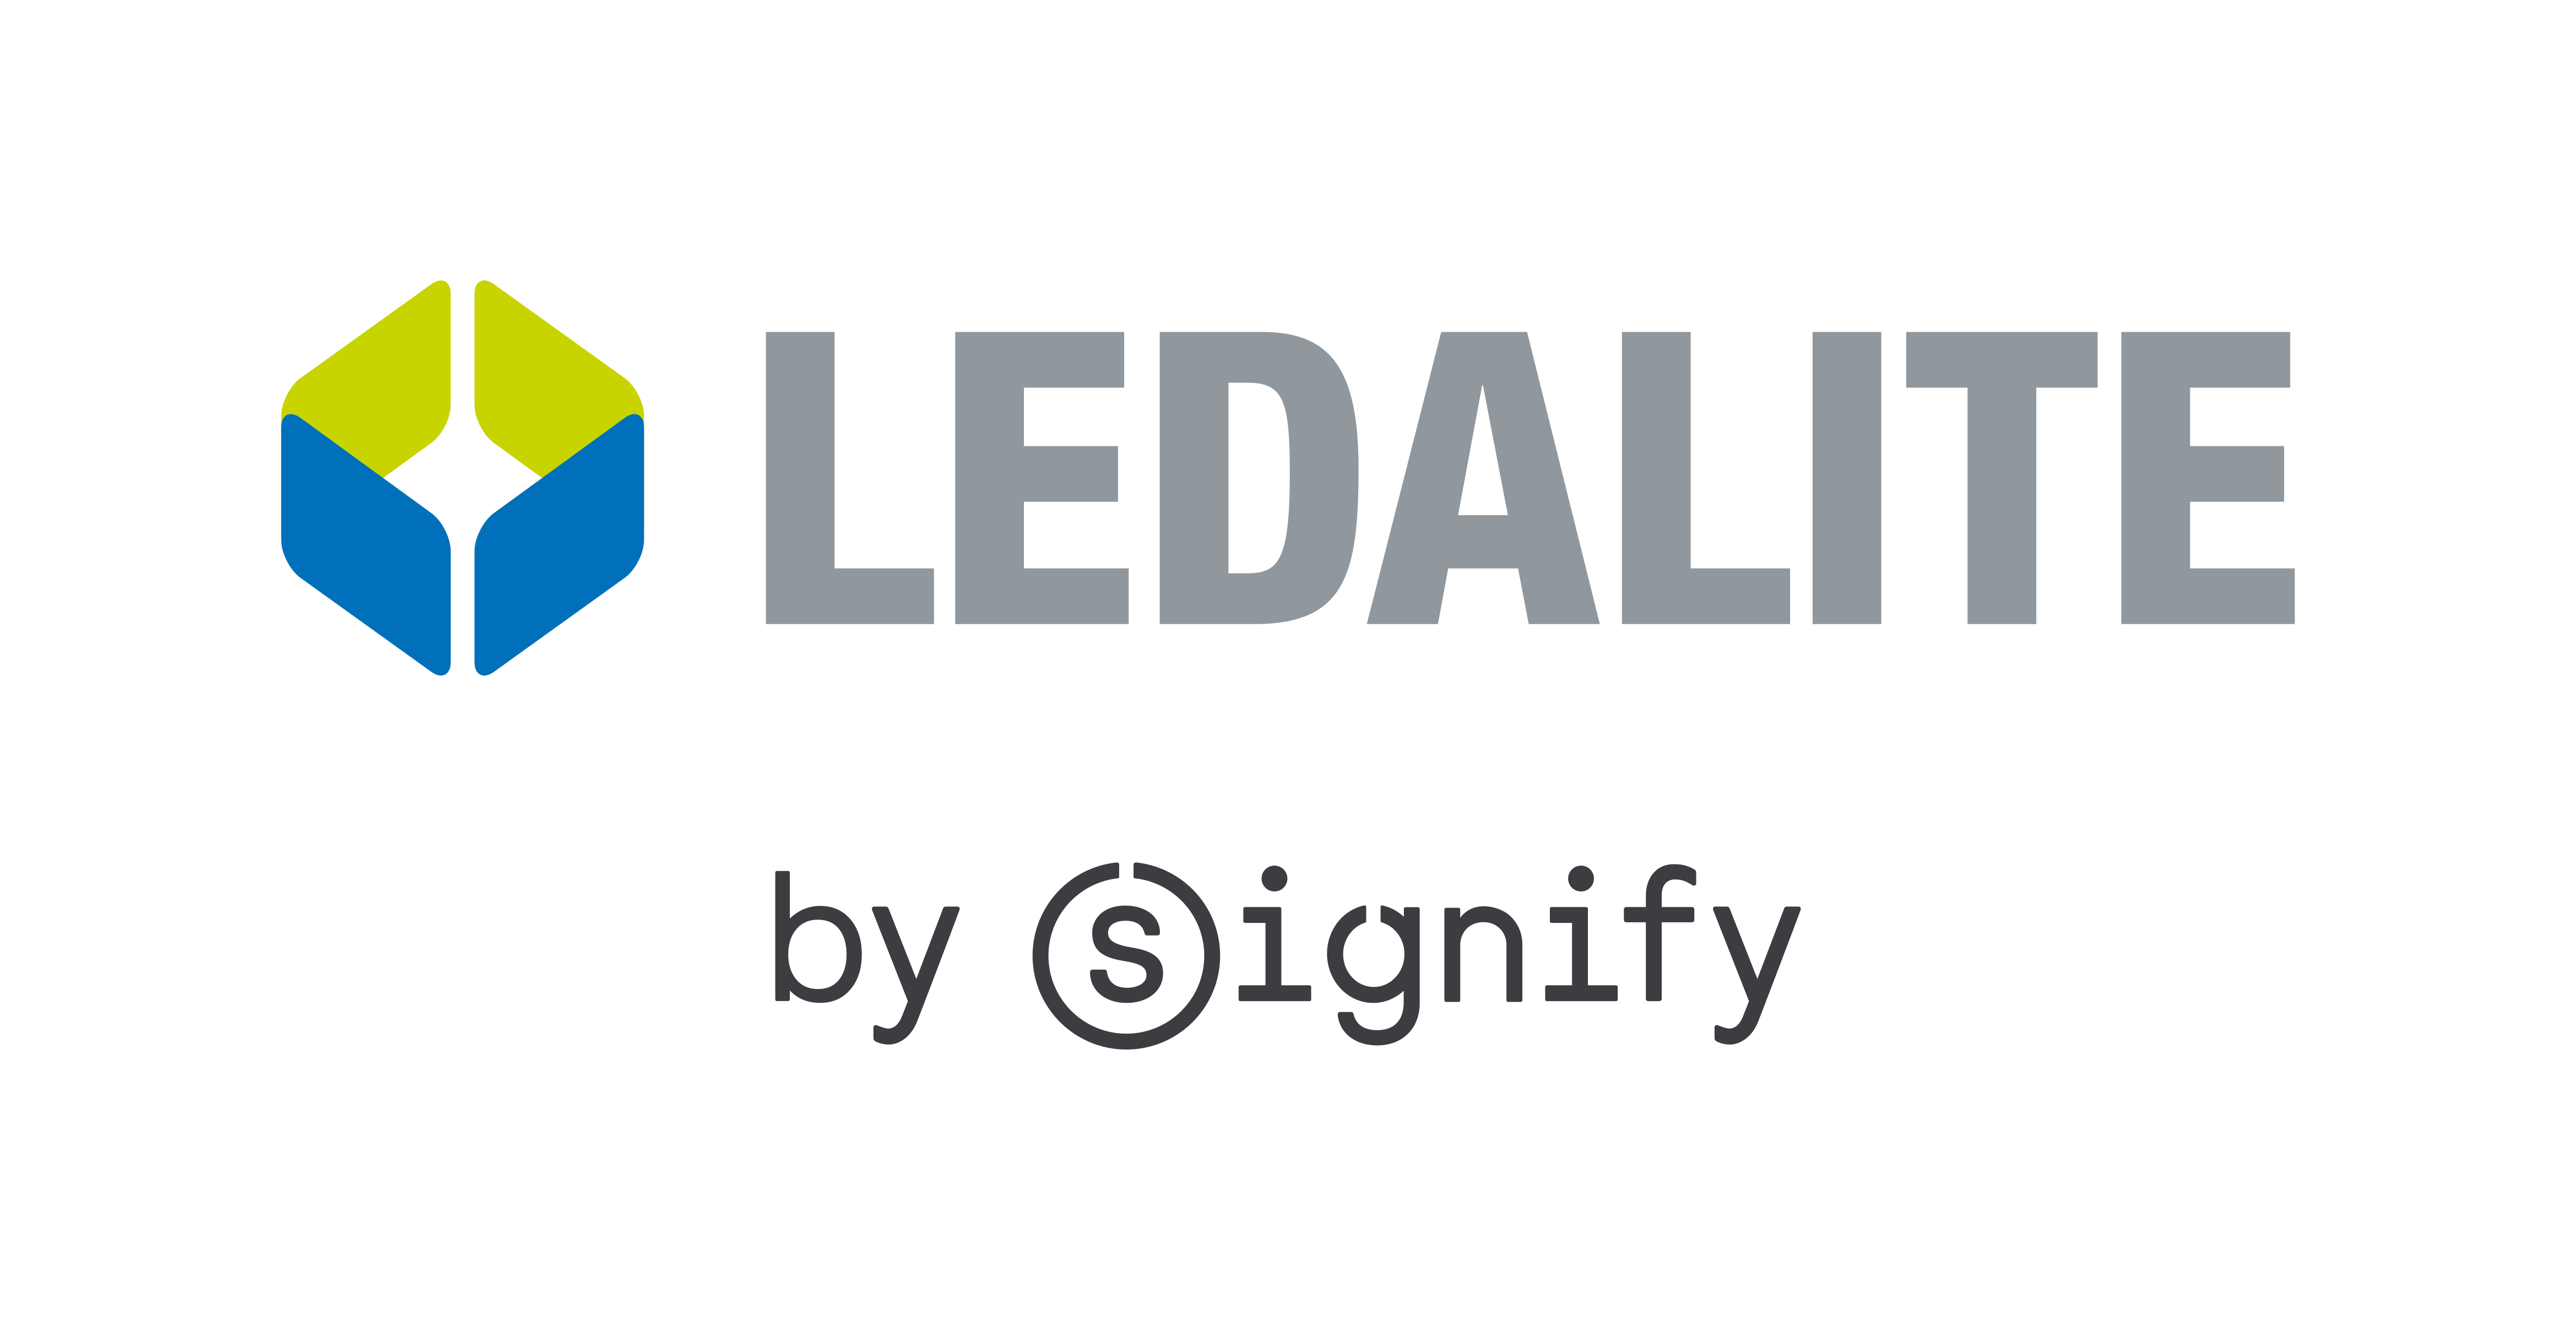 Ledalite by Signify